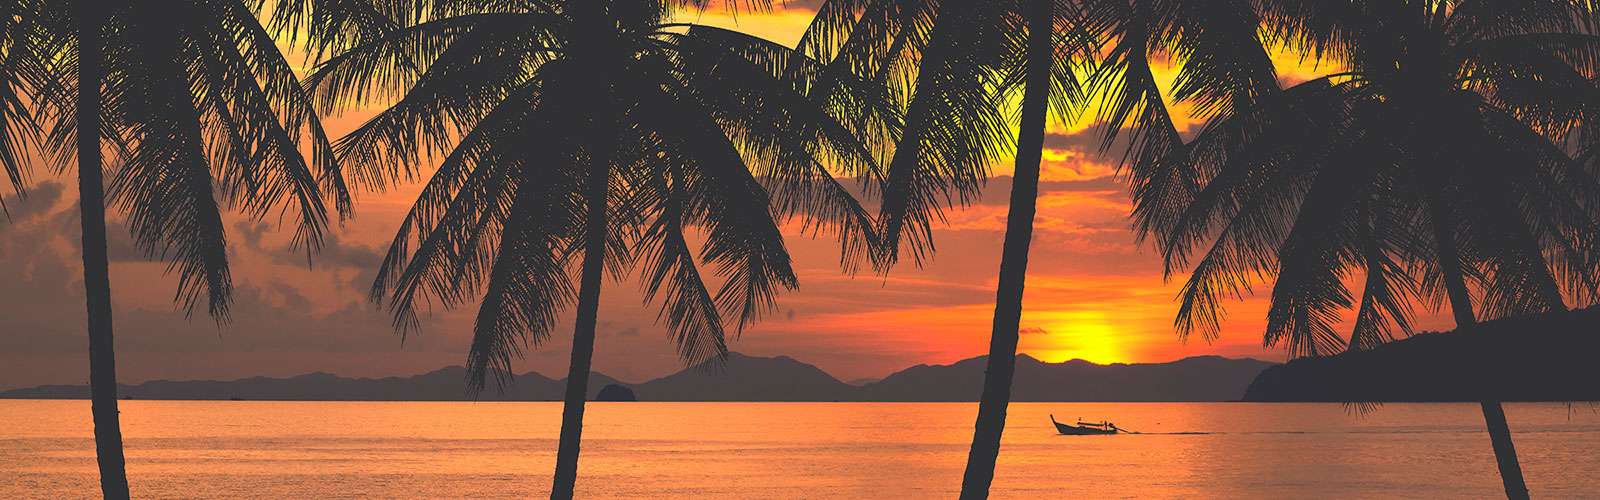 Sunset over the ocean with palm trees in the foreground